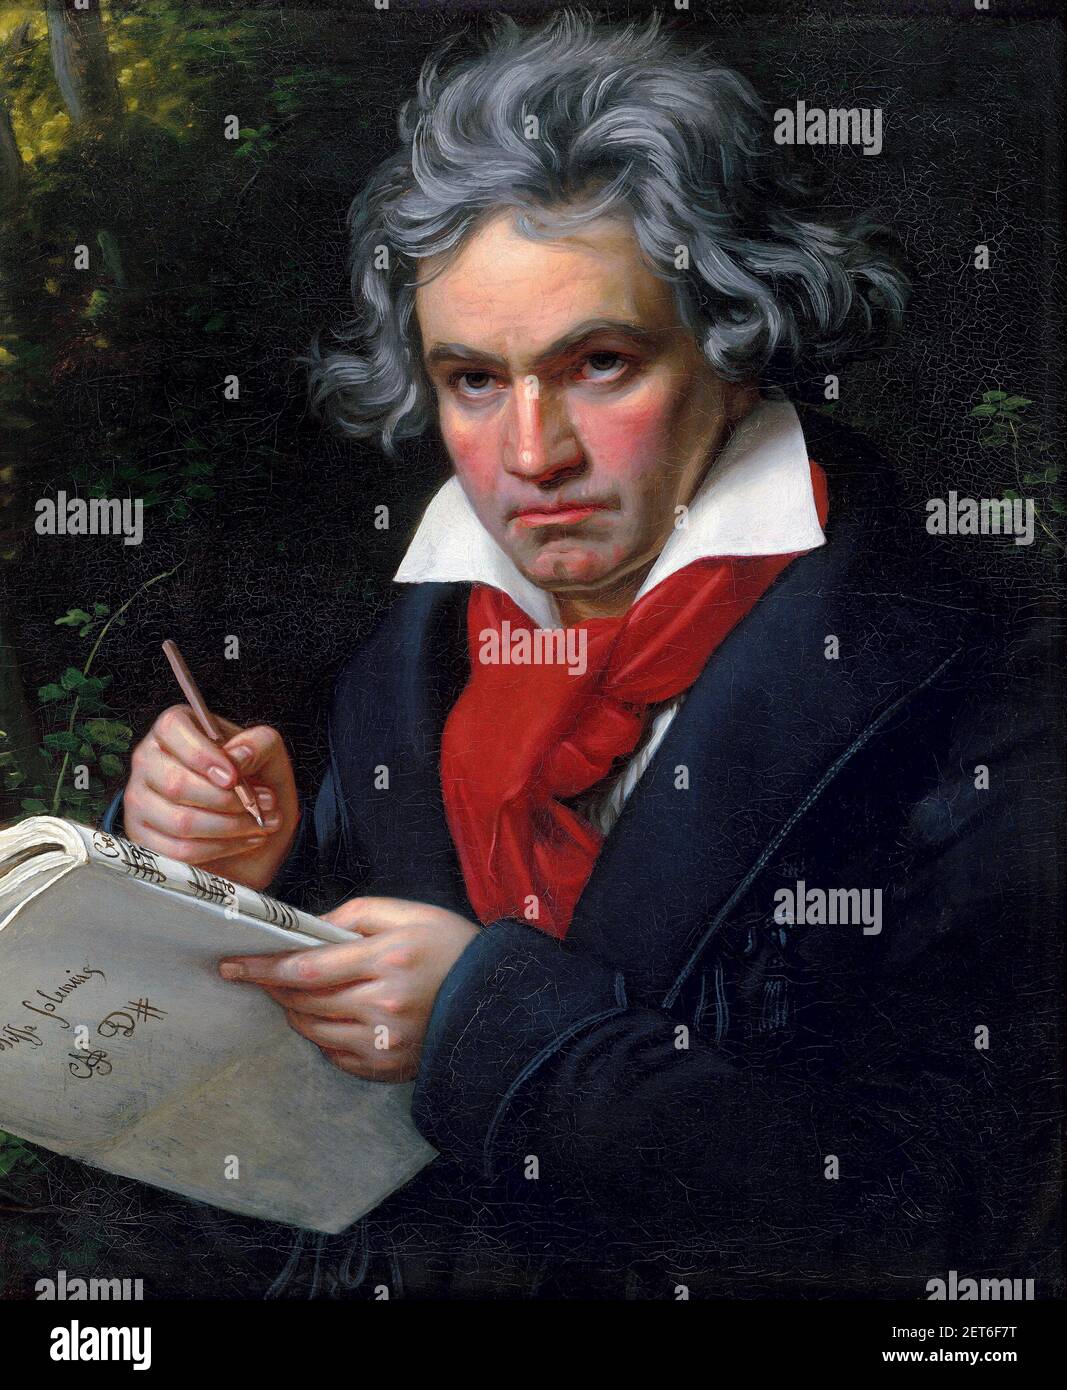 Beethoven; Portrait of the German composer, Ludwig van Beethoven (1770-1827) holding the manuscript of the Missa solemnis, painting by Joseph Karl Stieler, 1820 Stock Photo